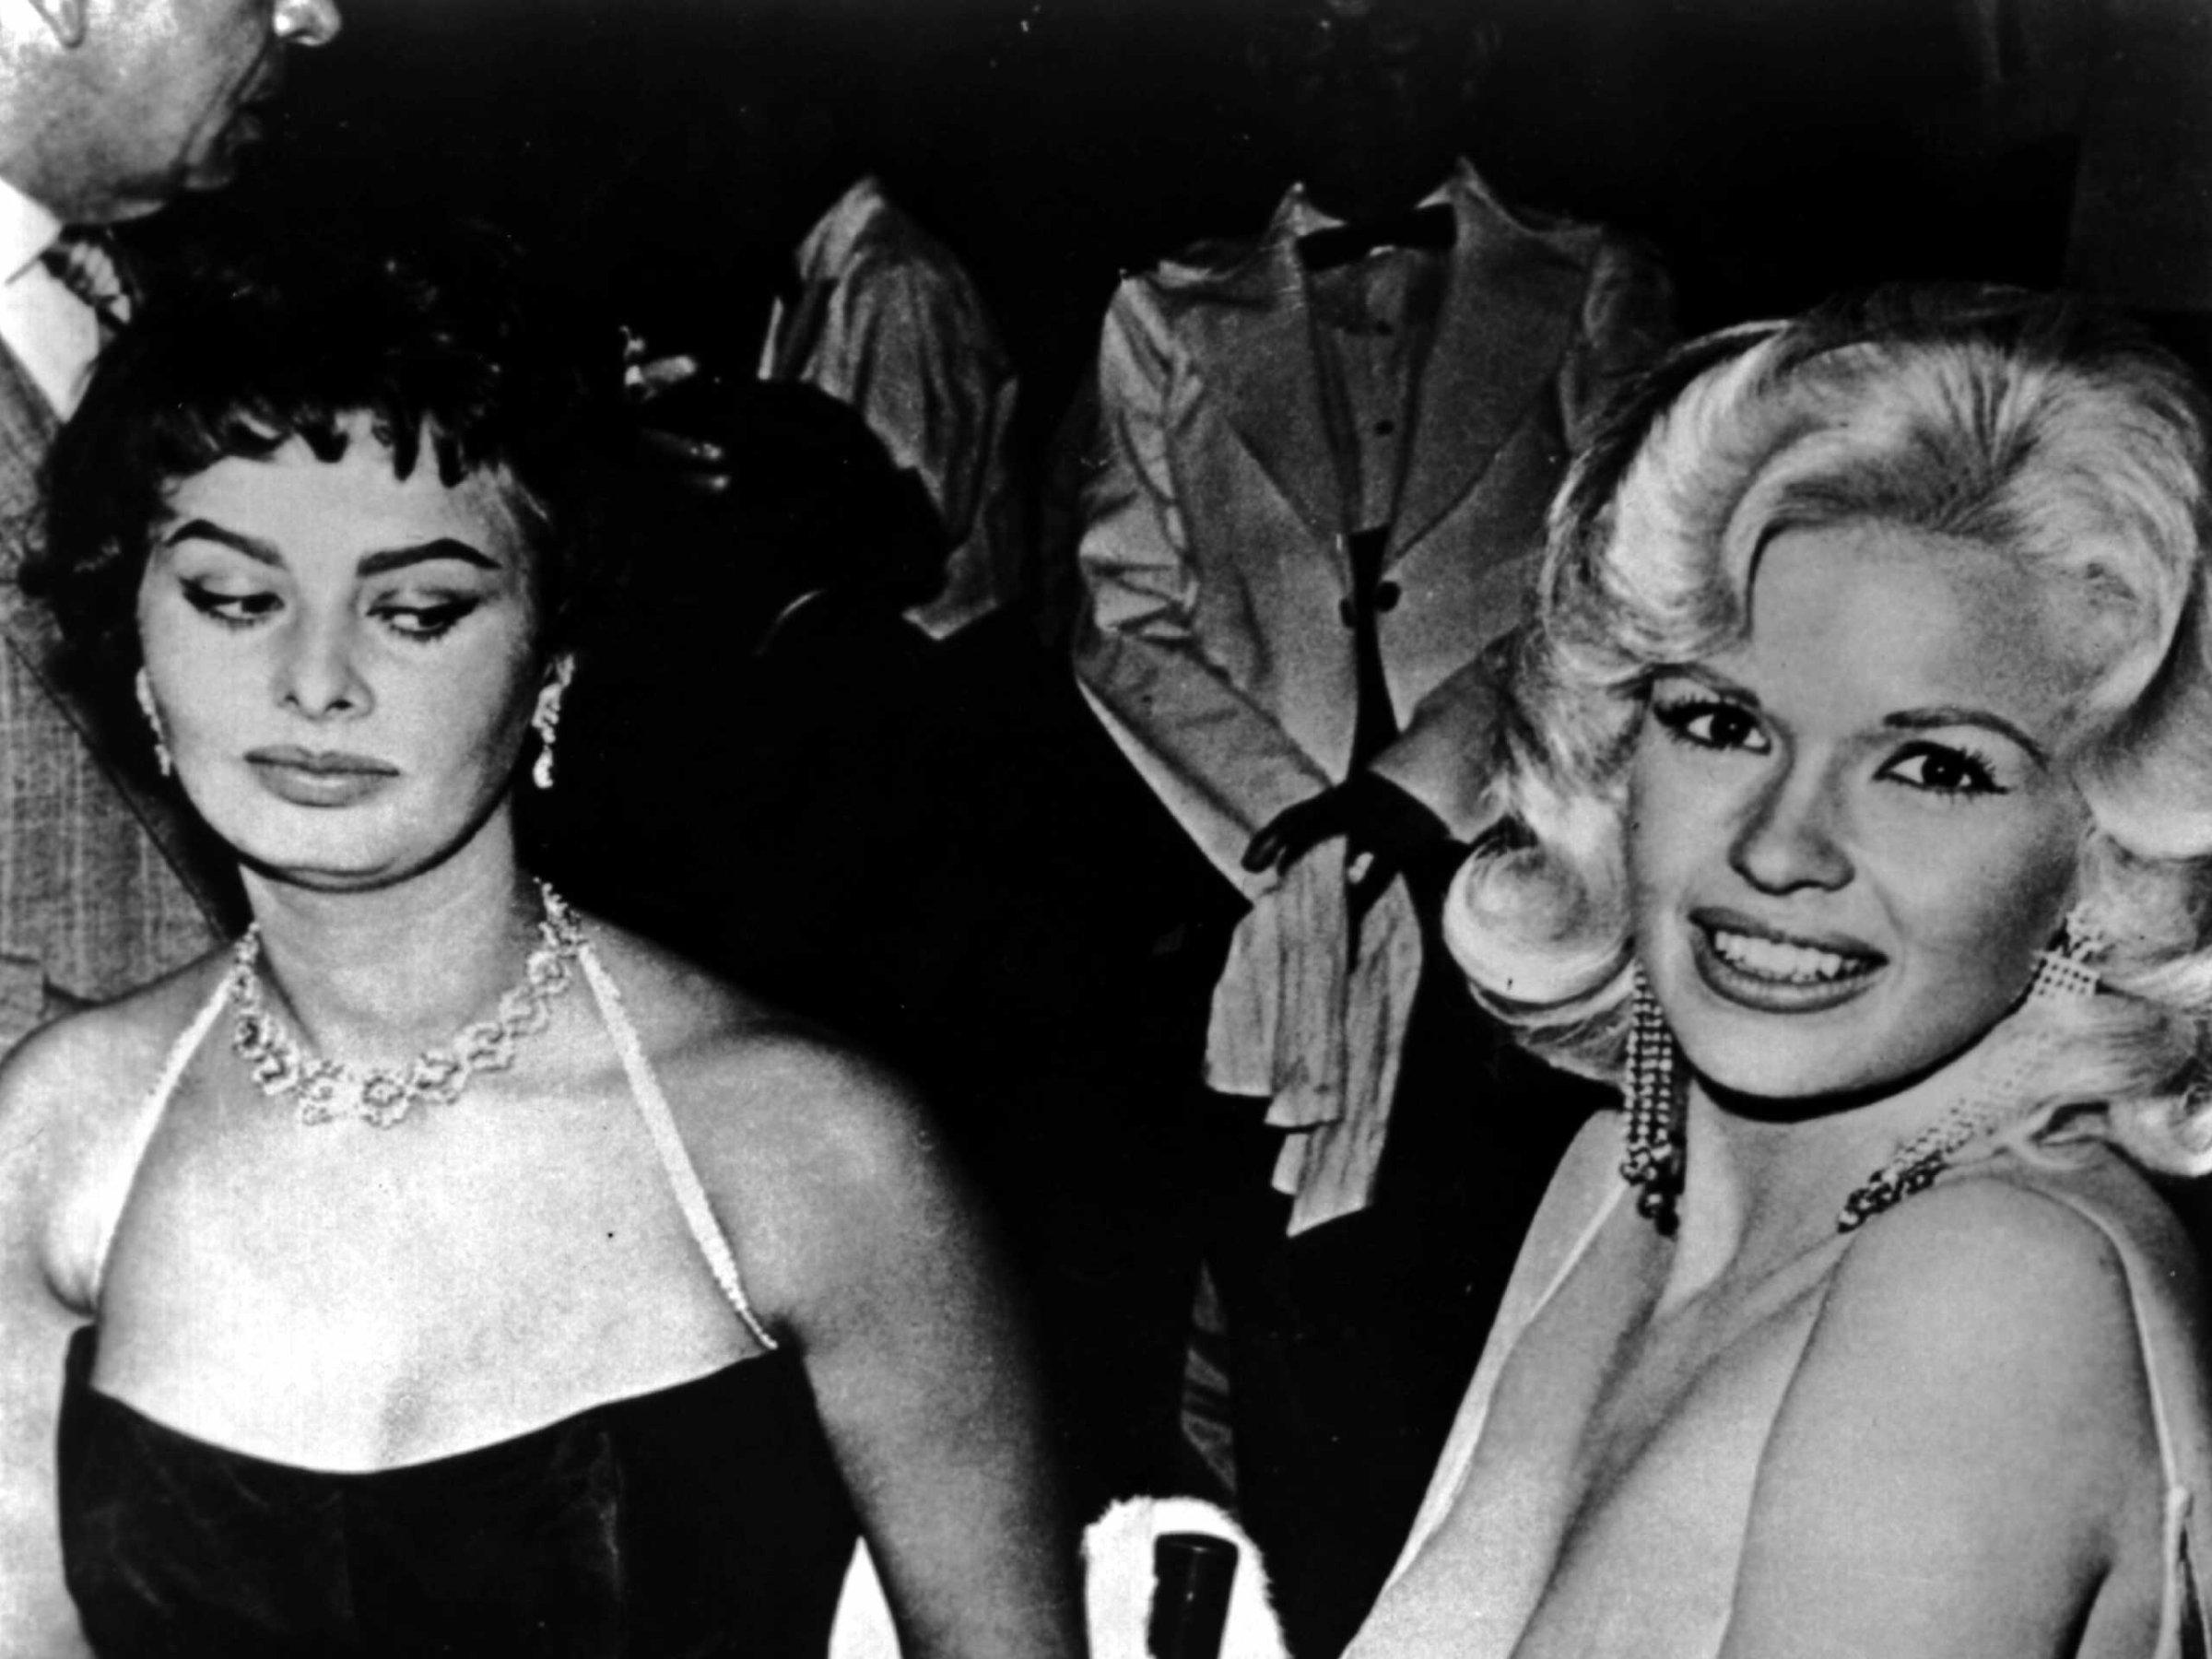 Jayne Mansfield tries to steal the show in a very low cut dress at a party thrown by 20th Century-Fox for Sophia Loren on April 12, 1957 in Los Angeles.